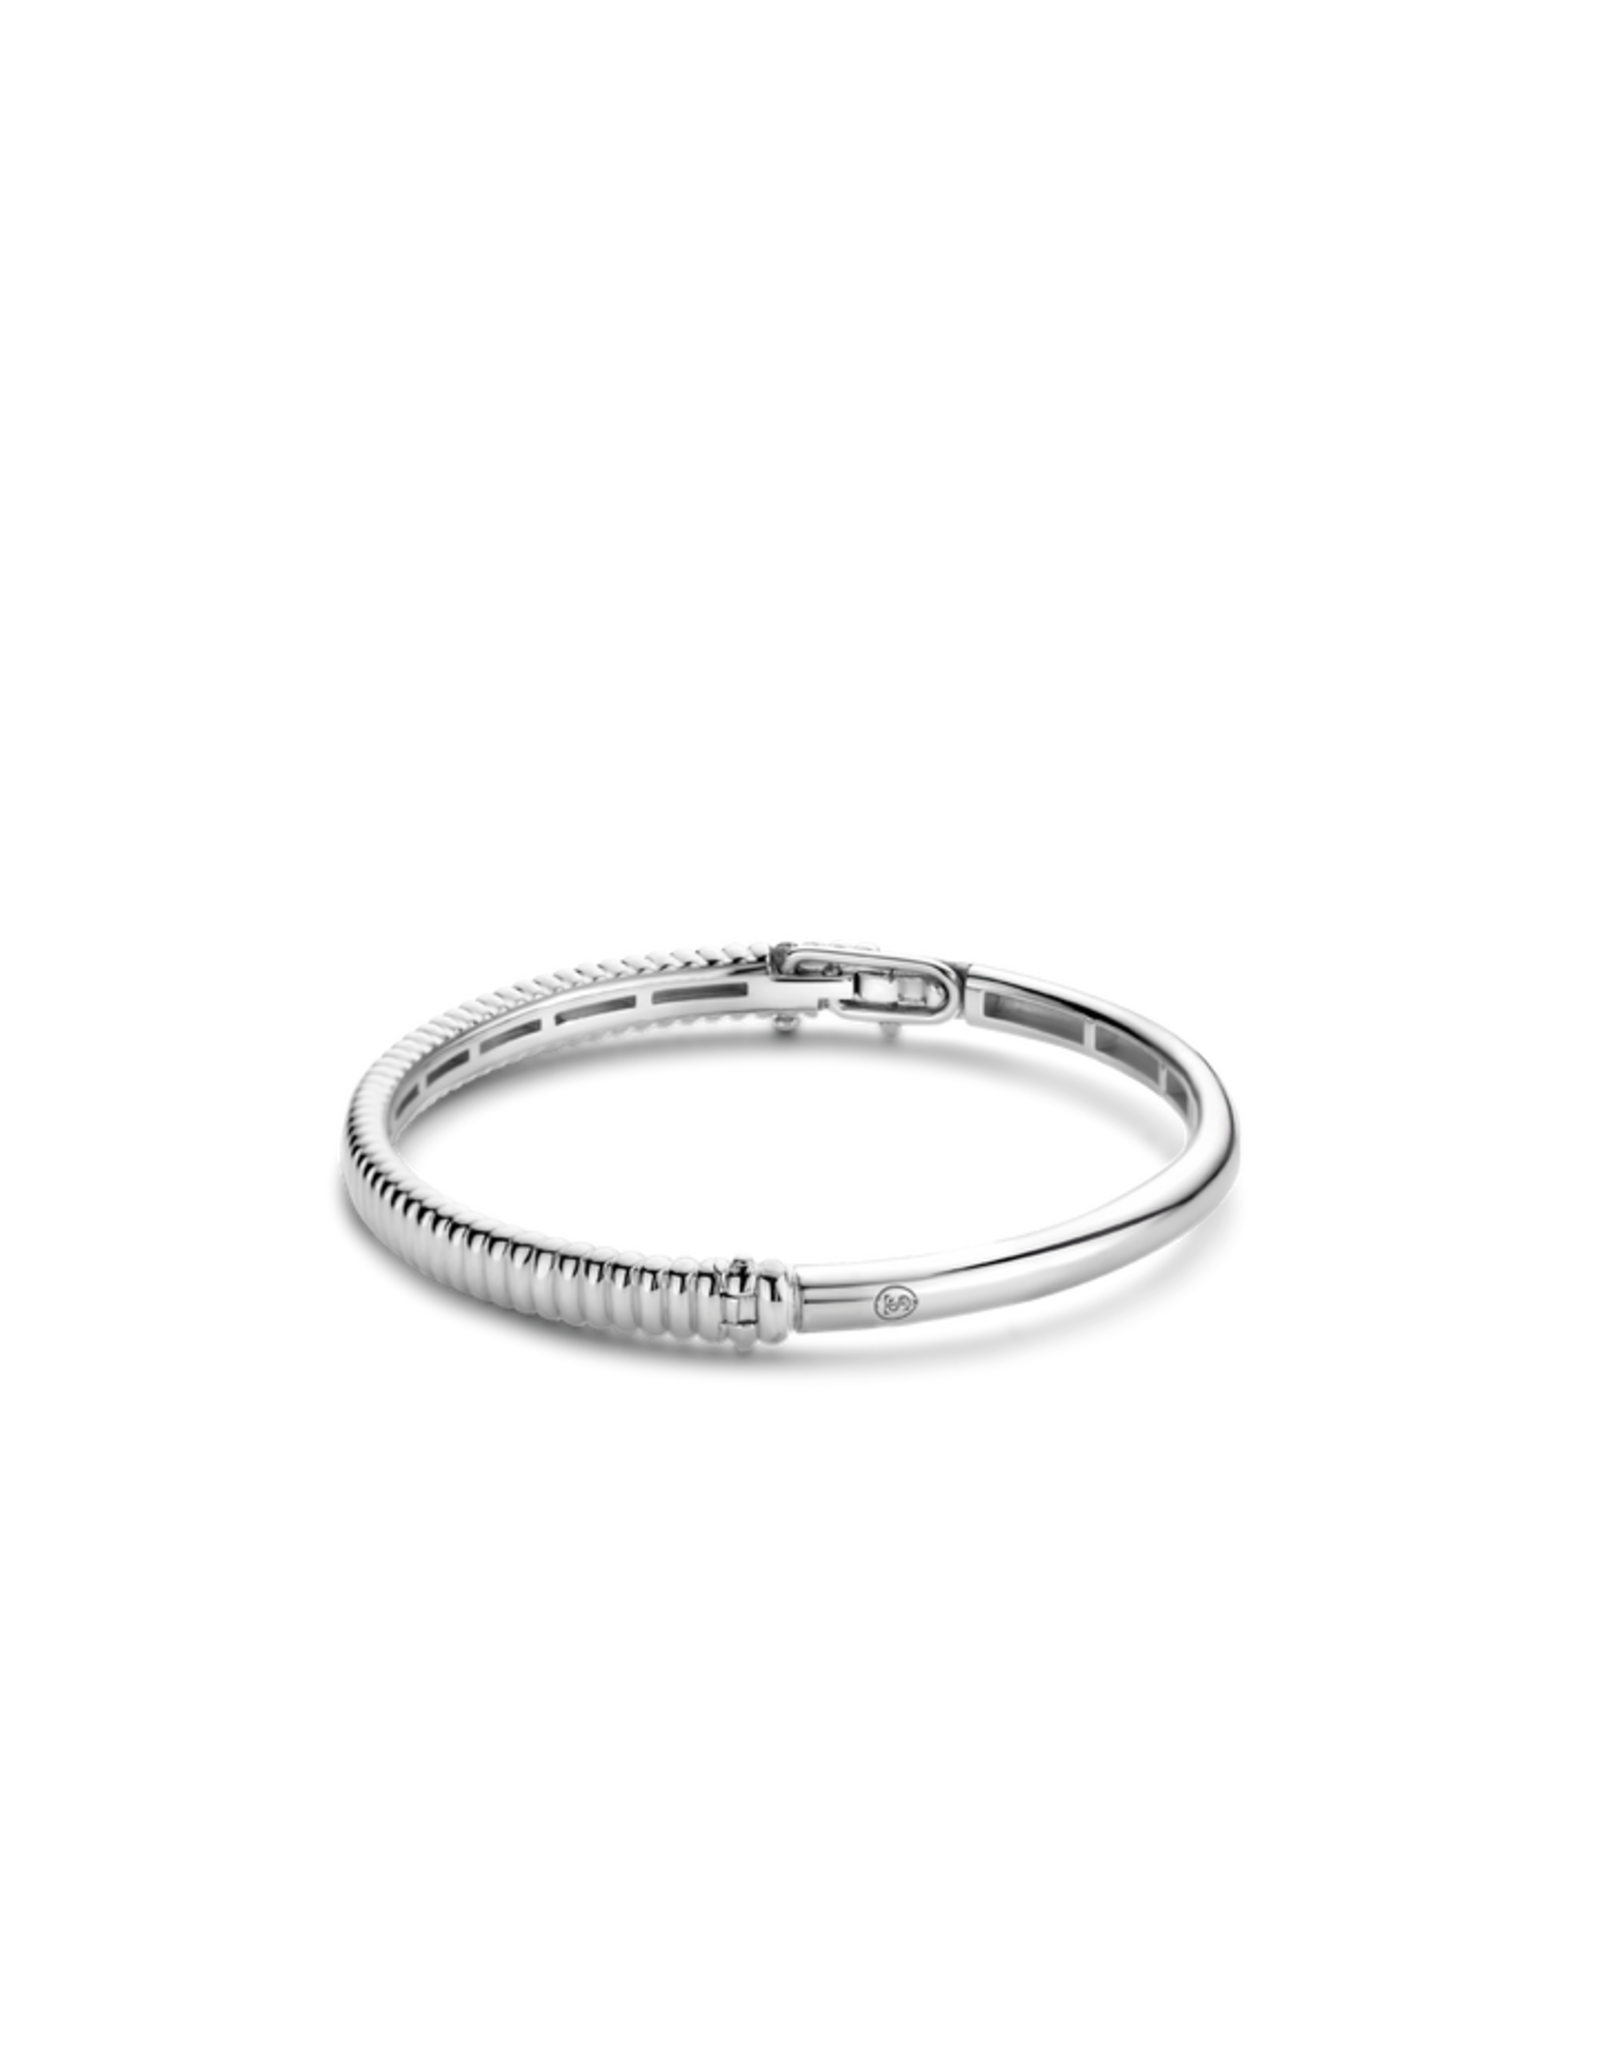 Silver Fluted Bangle